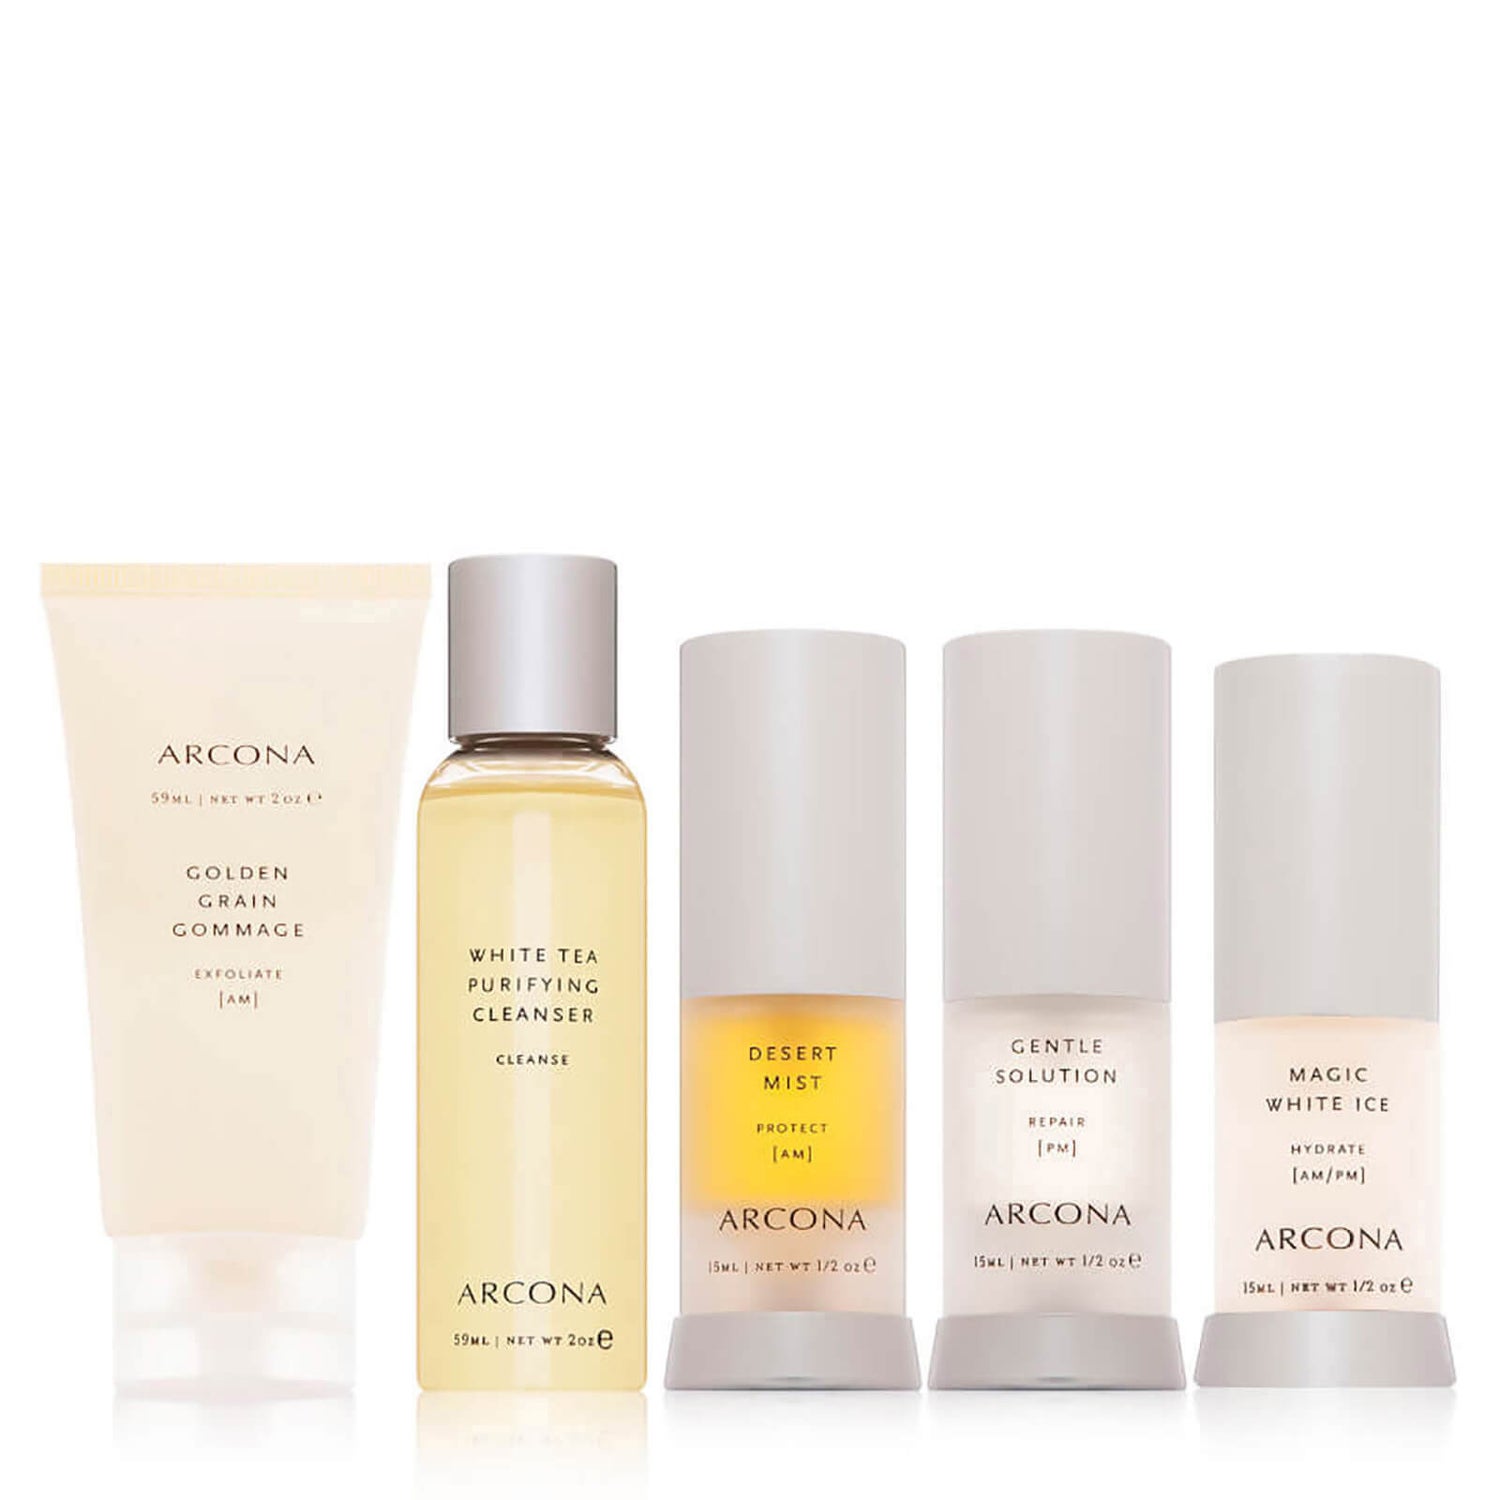 ARCONA Travel Kit For Normal Skin (5 piece)